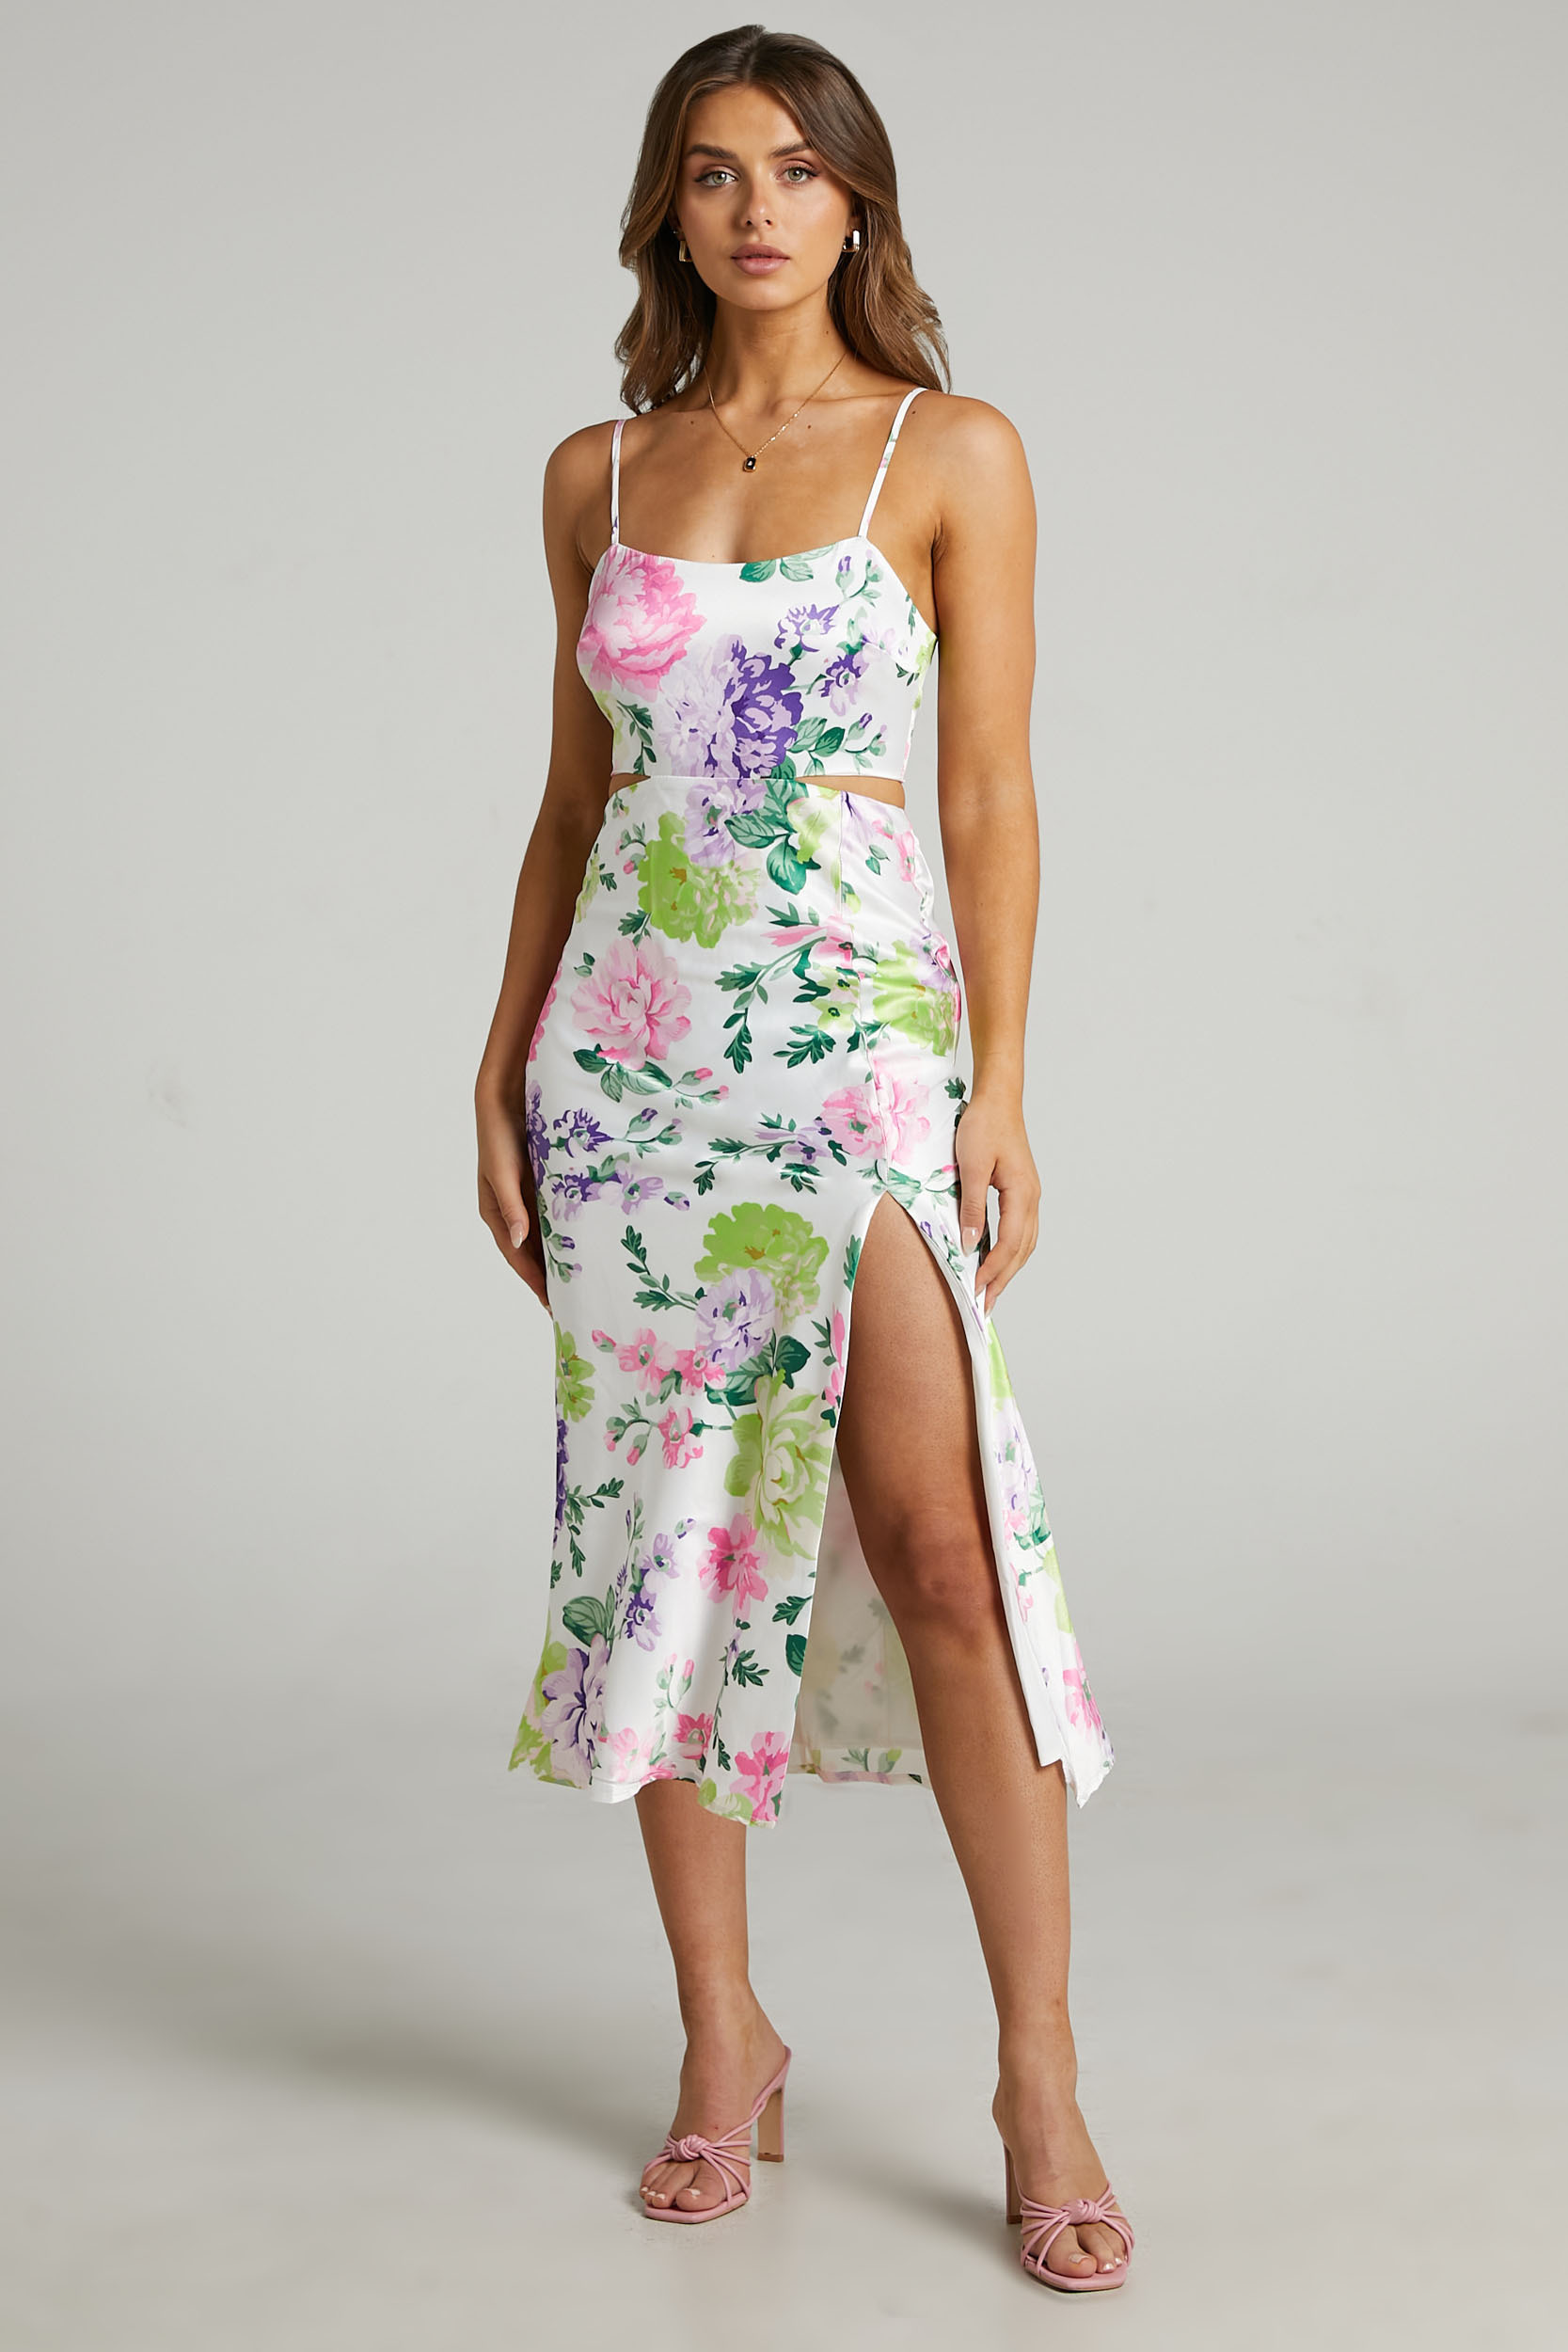 Kerstine Slip Cut Out Midi Dress in Neon Floral - 04, WHT1, hi-res image number null